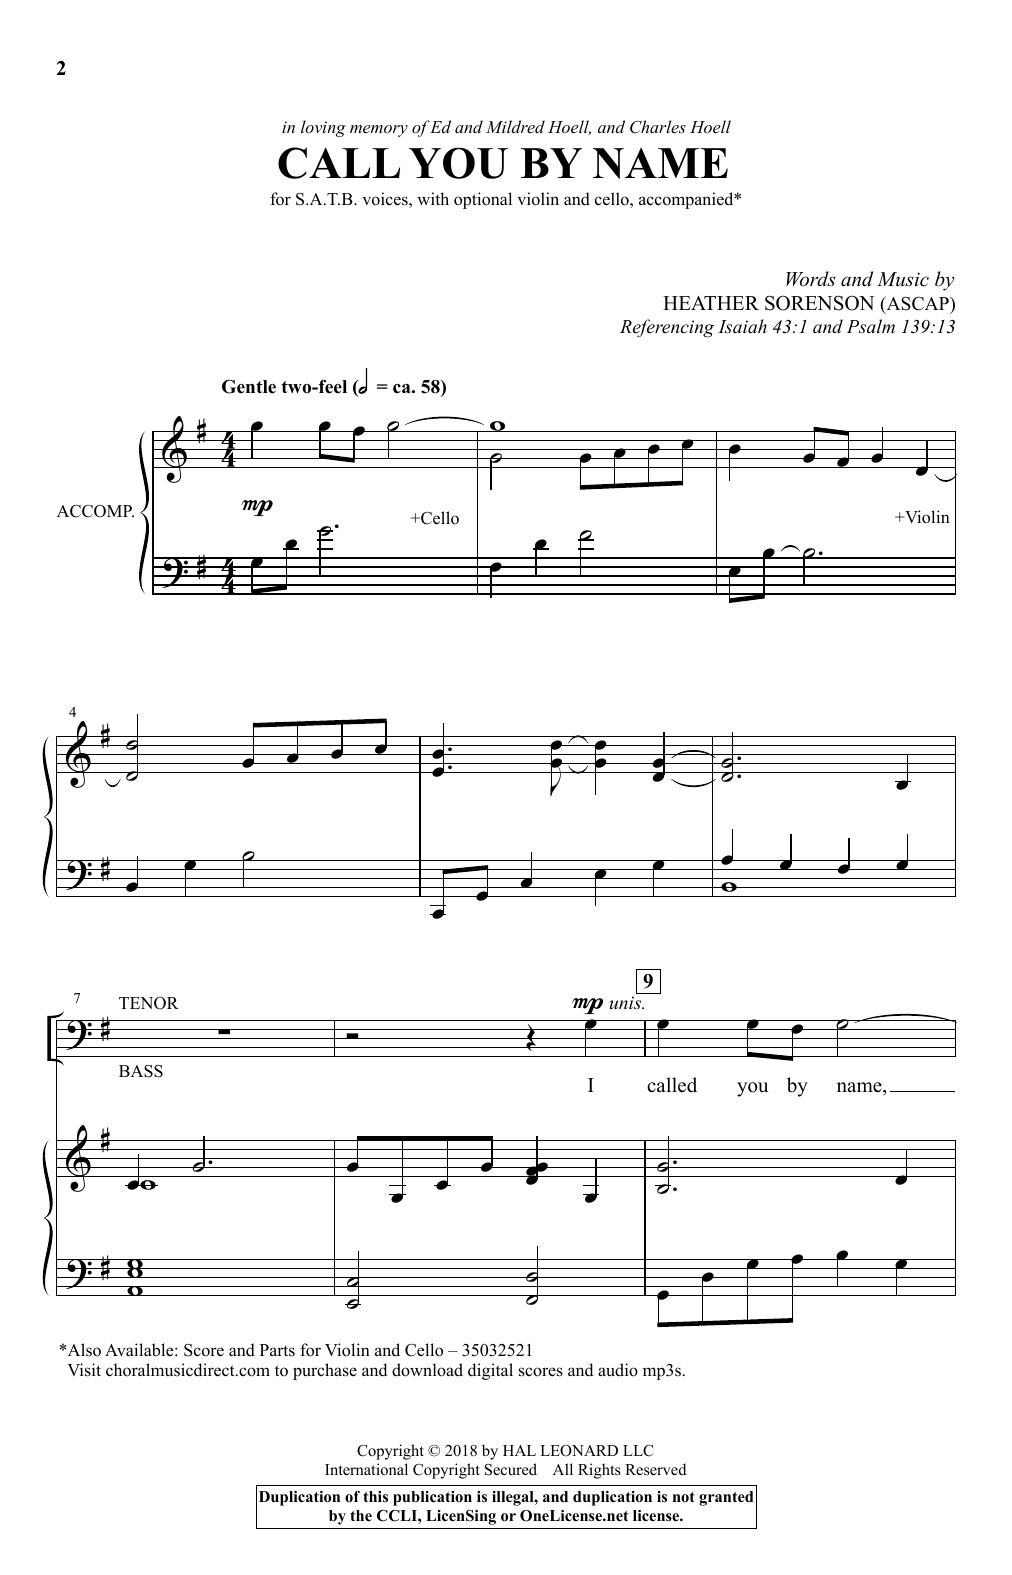 Download Heather Sorenson Call You By Name Sheet Music